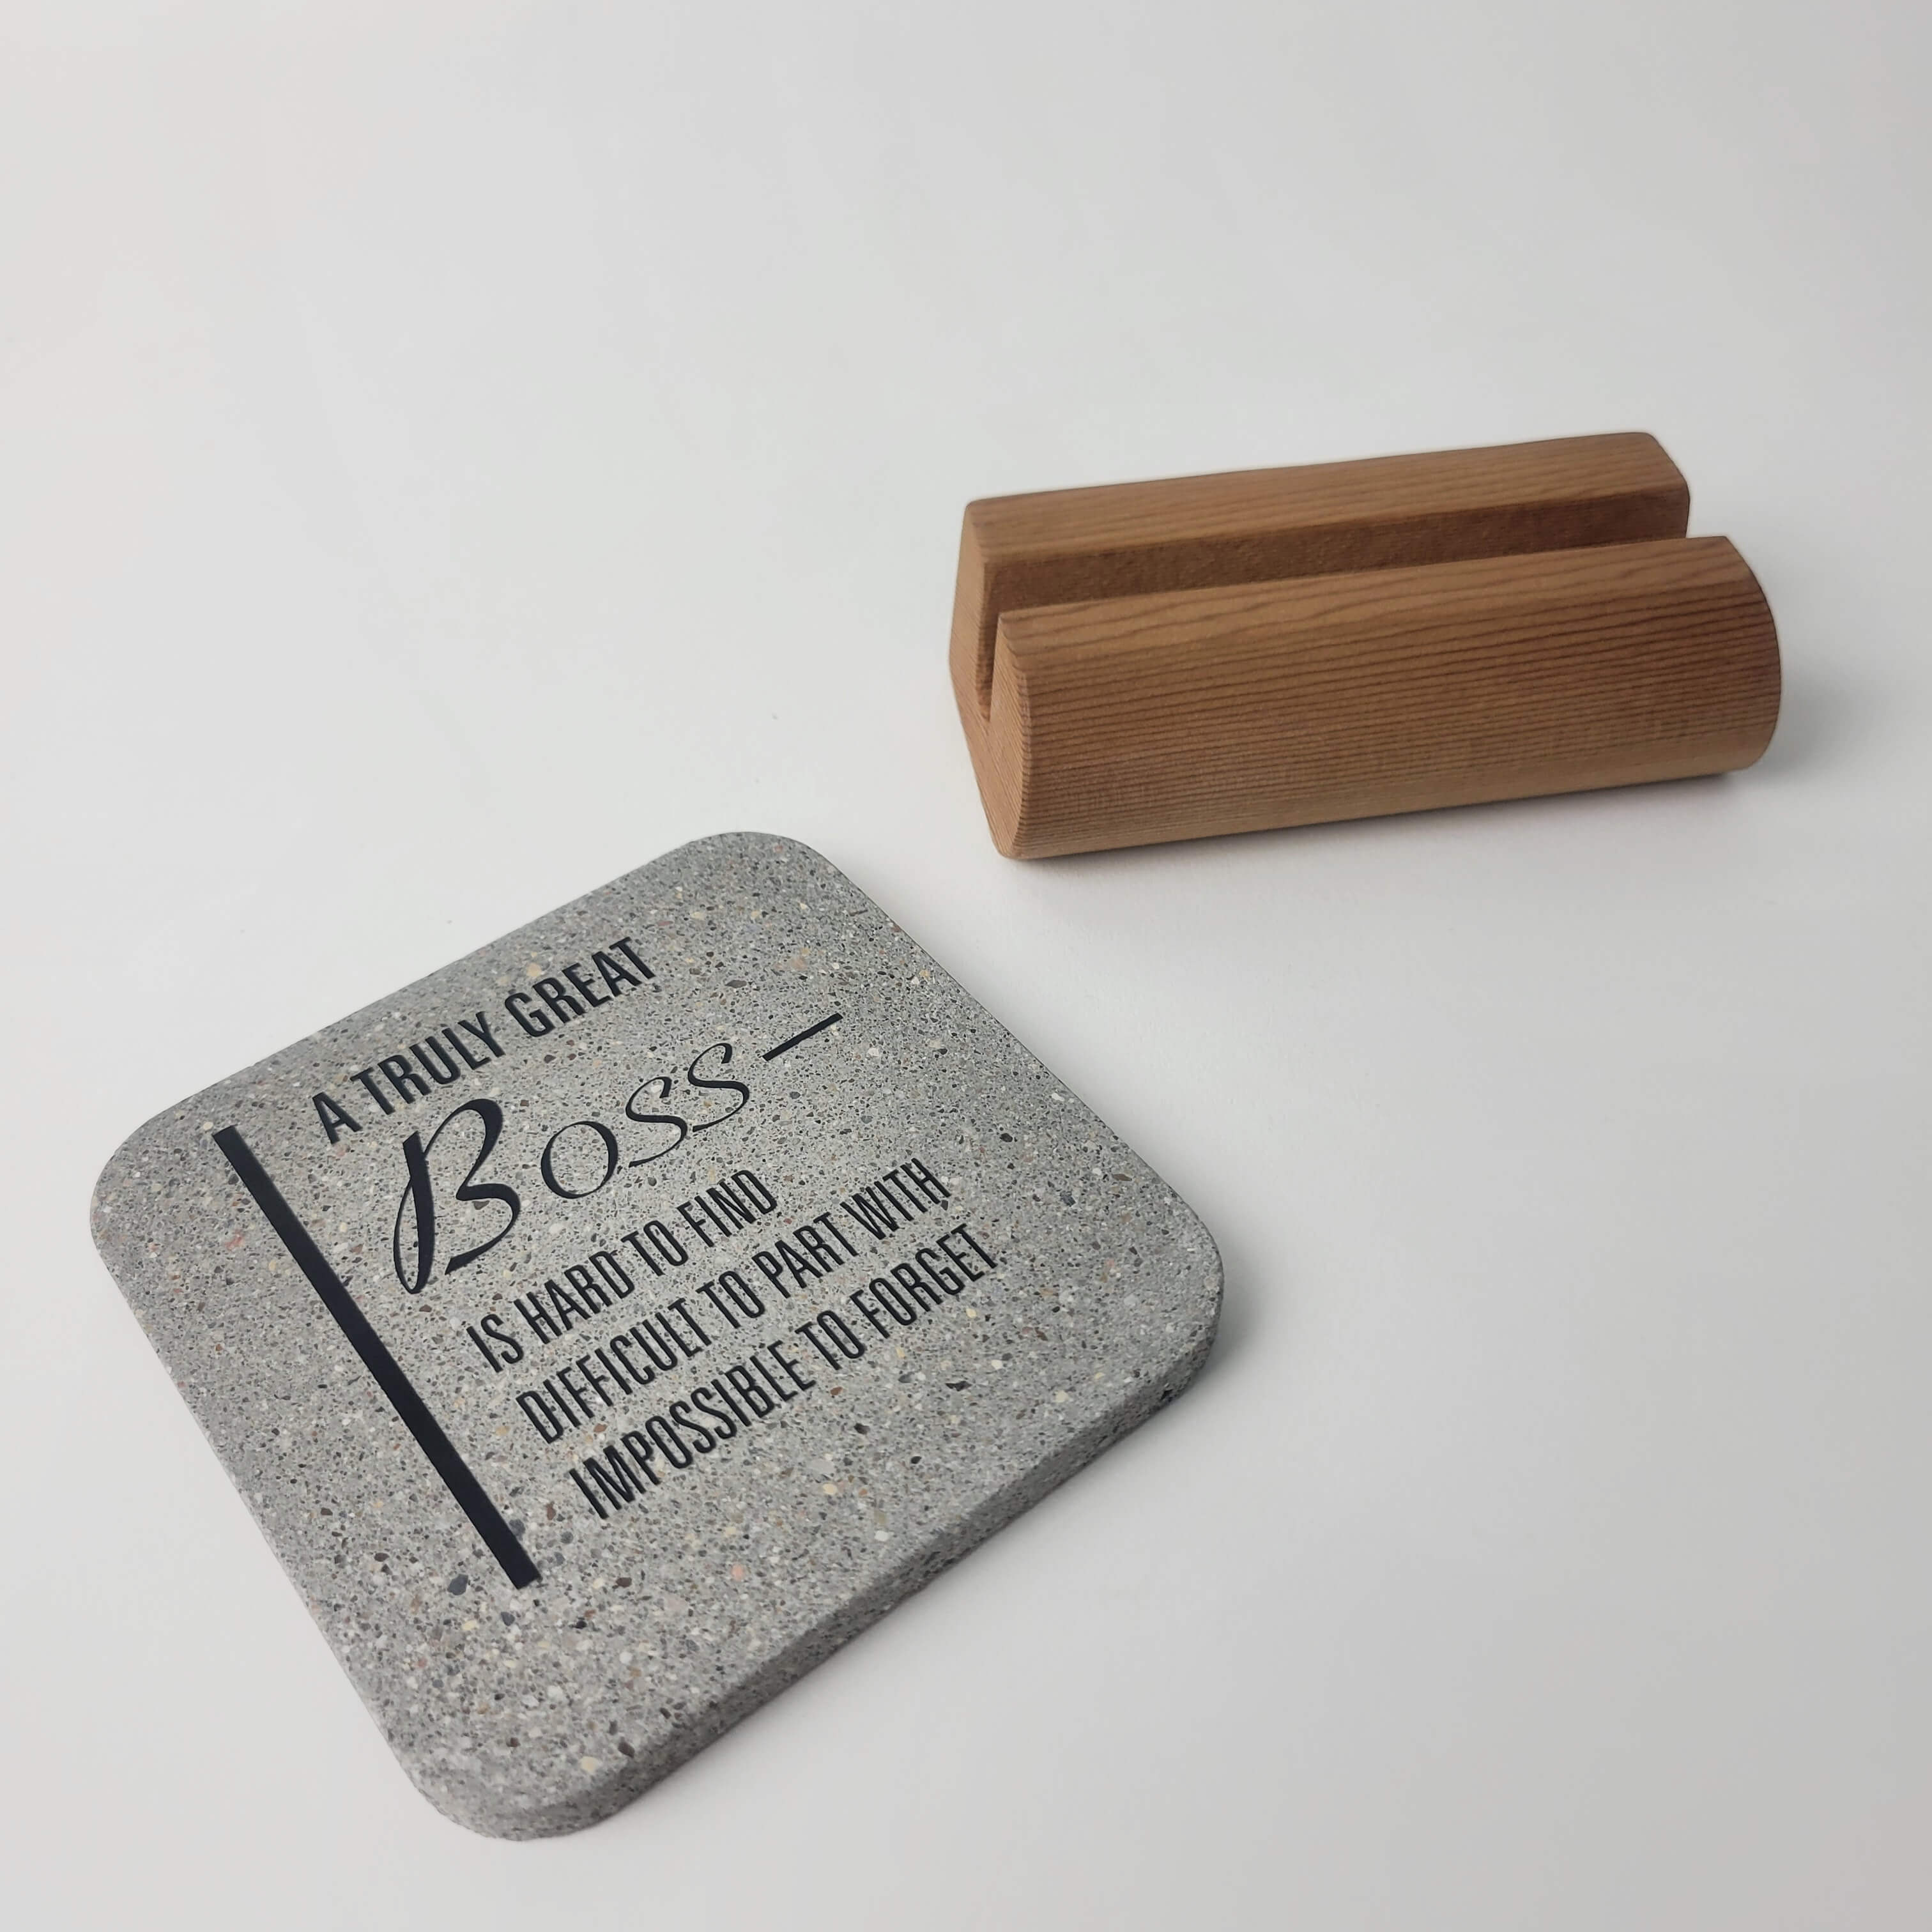 Grey stone motivational mini display 'A truly great boss' lying flat in the foreground with notched upcycled western red-cedar base in the background for office and home decor.